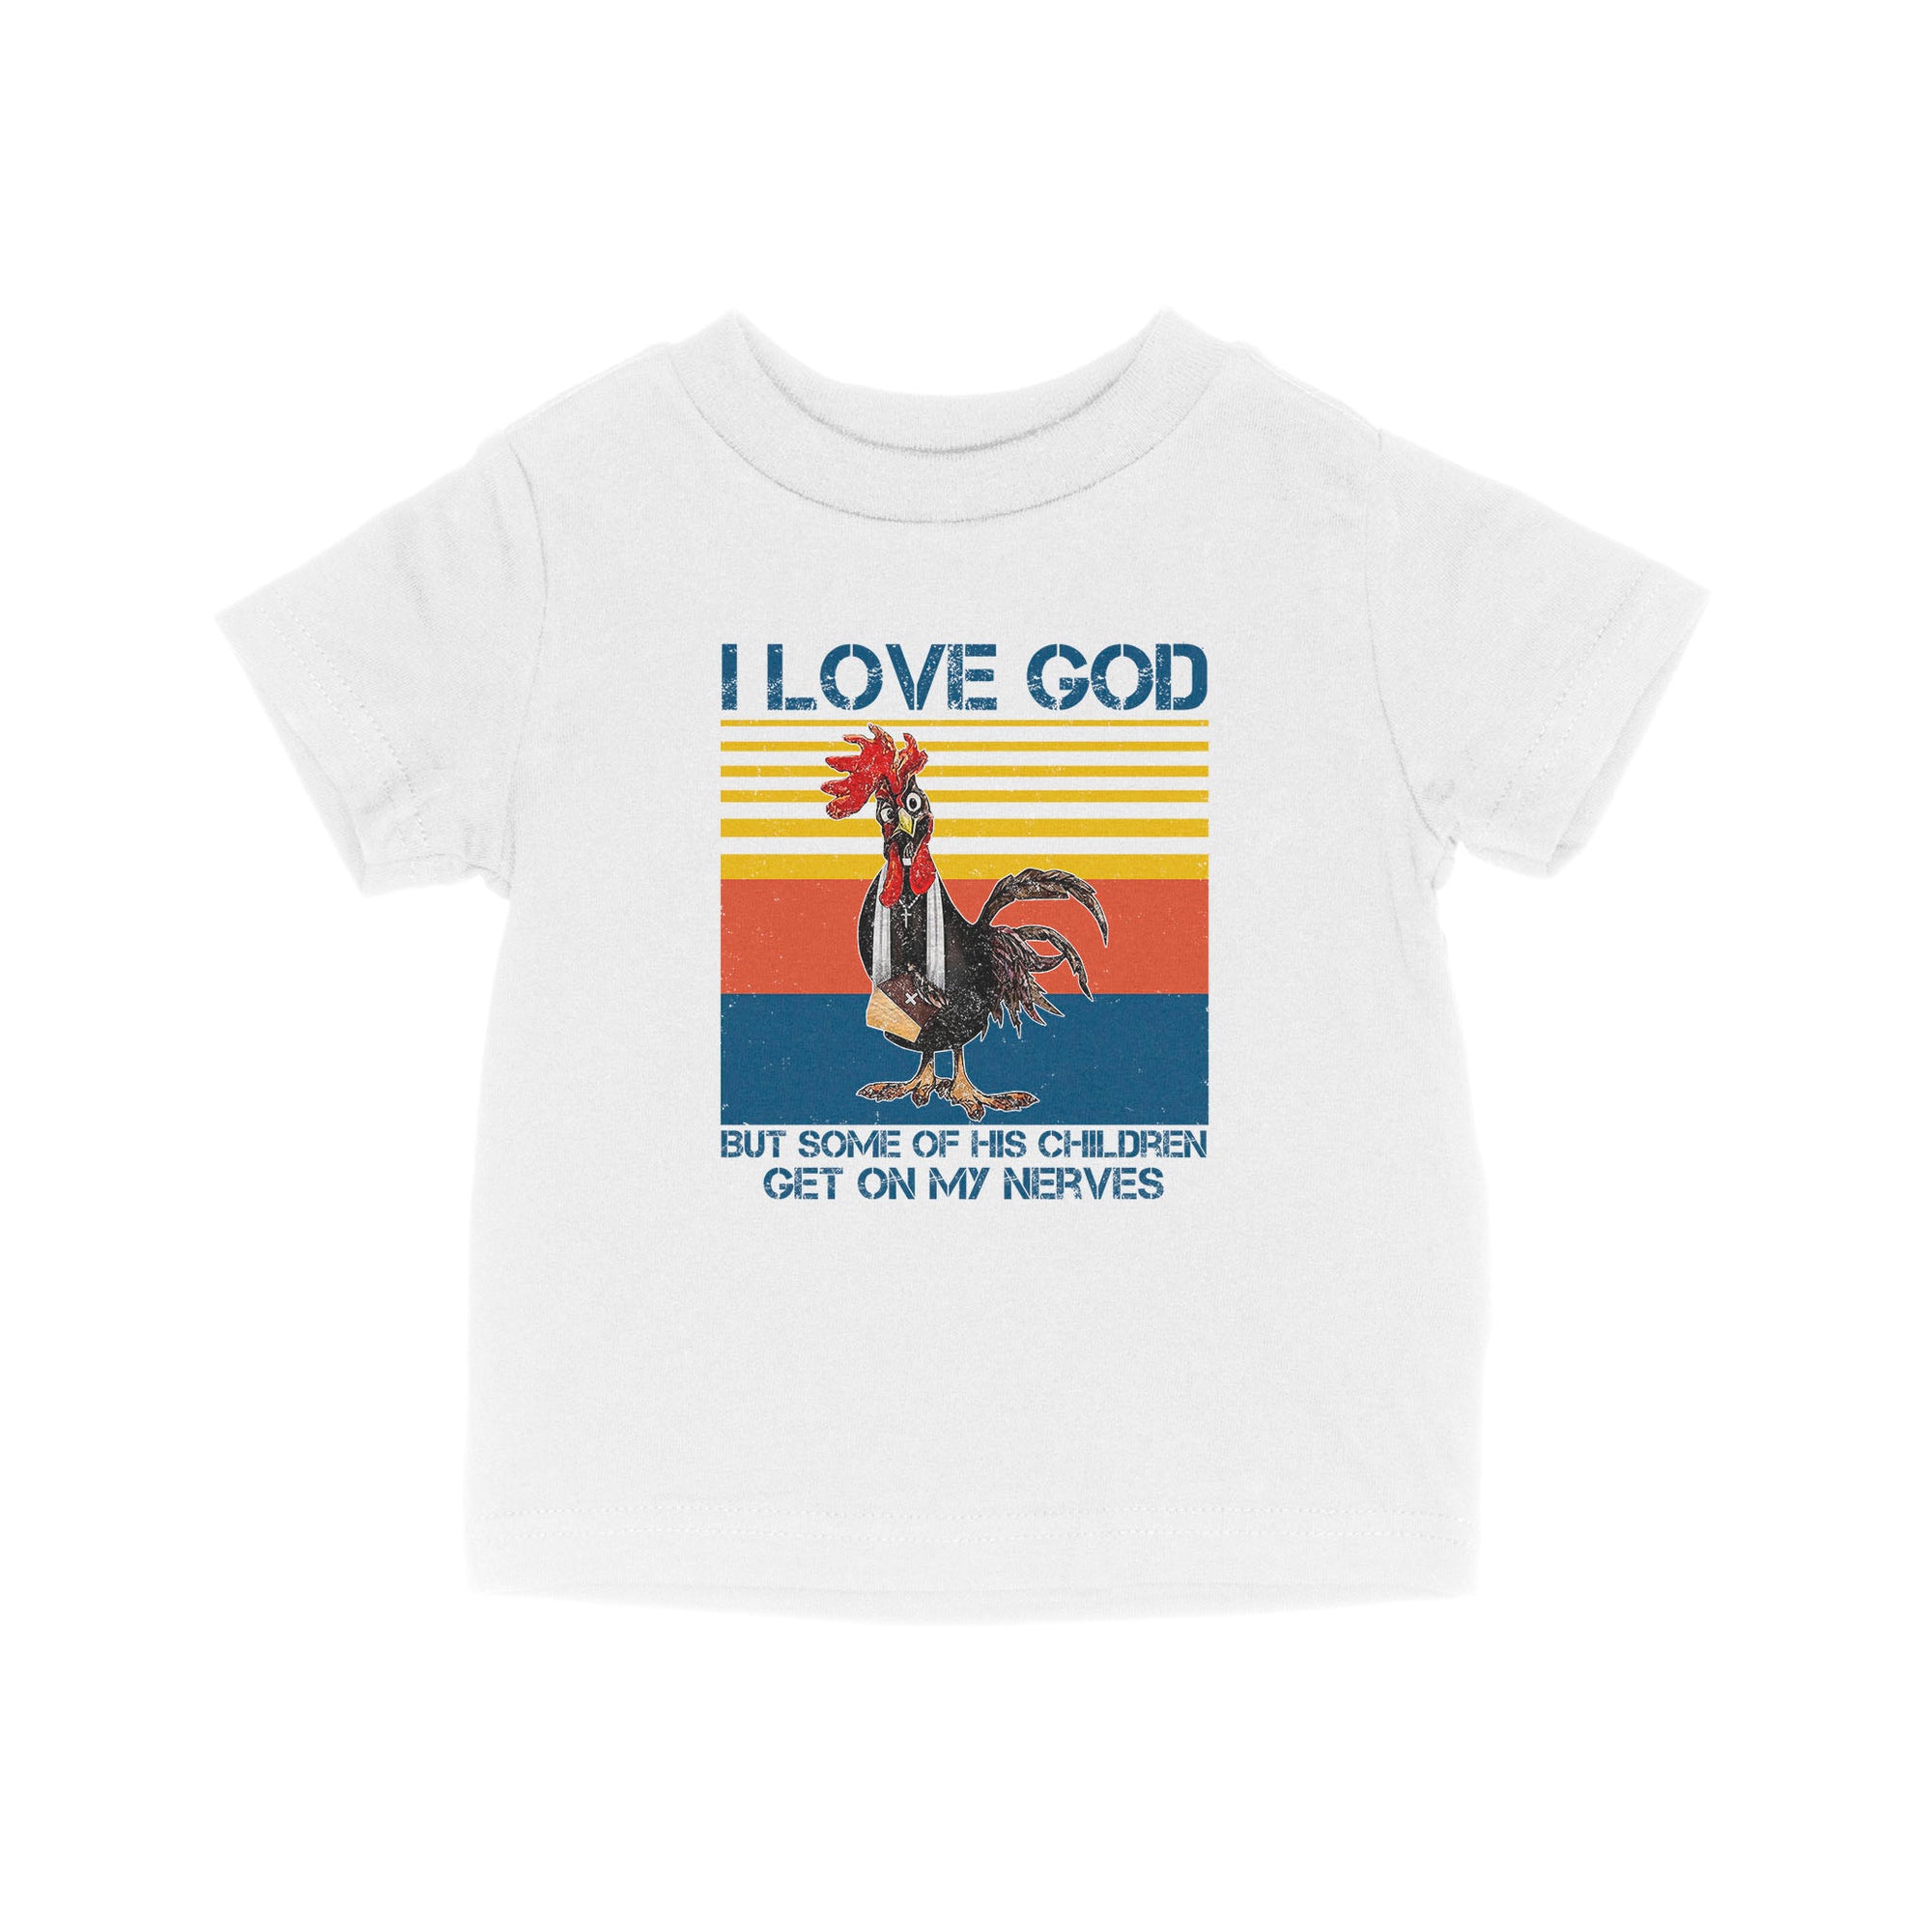 I Love God But Some Of His Children Get On My Nerves - Baby T-Shirt